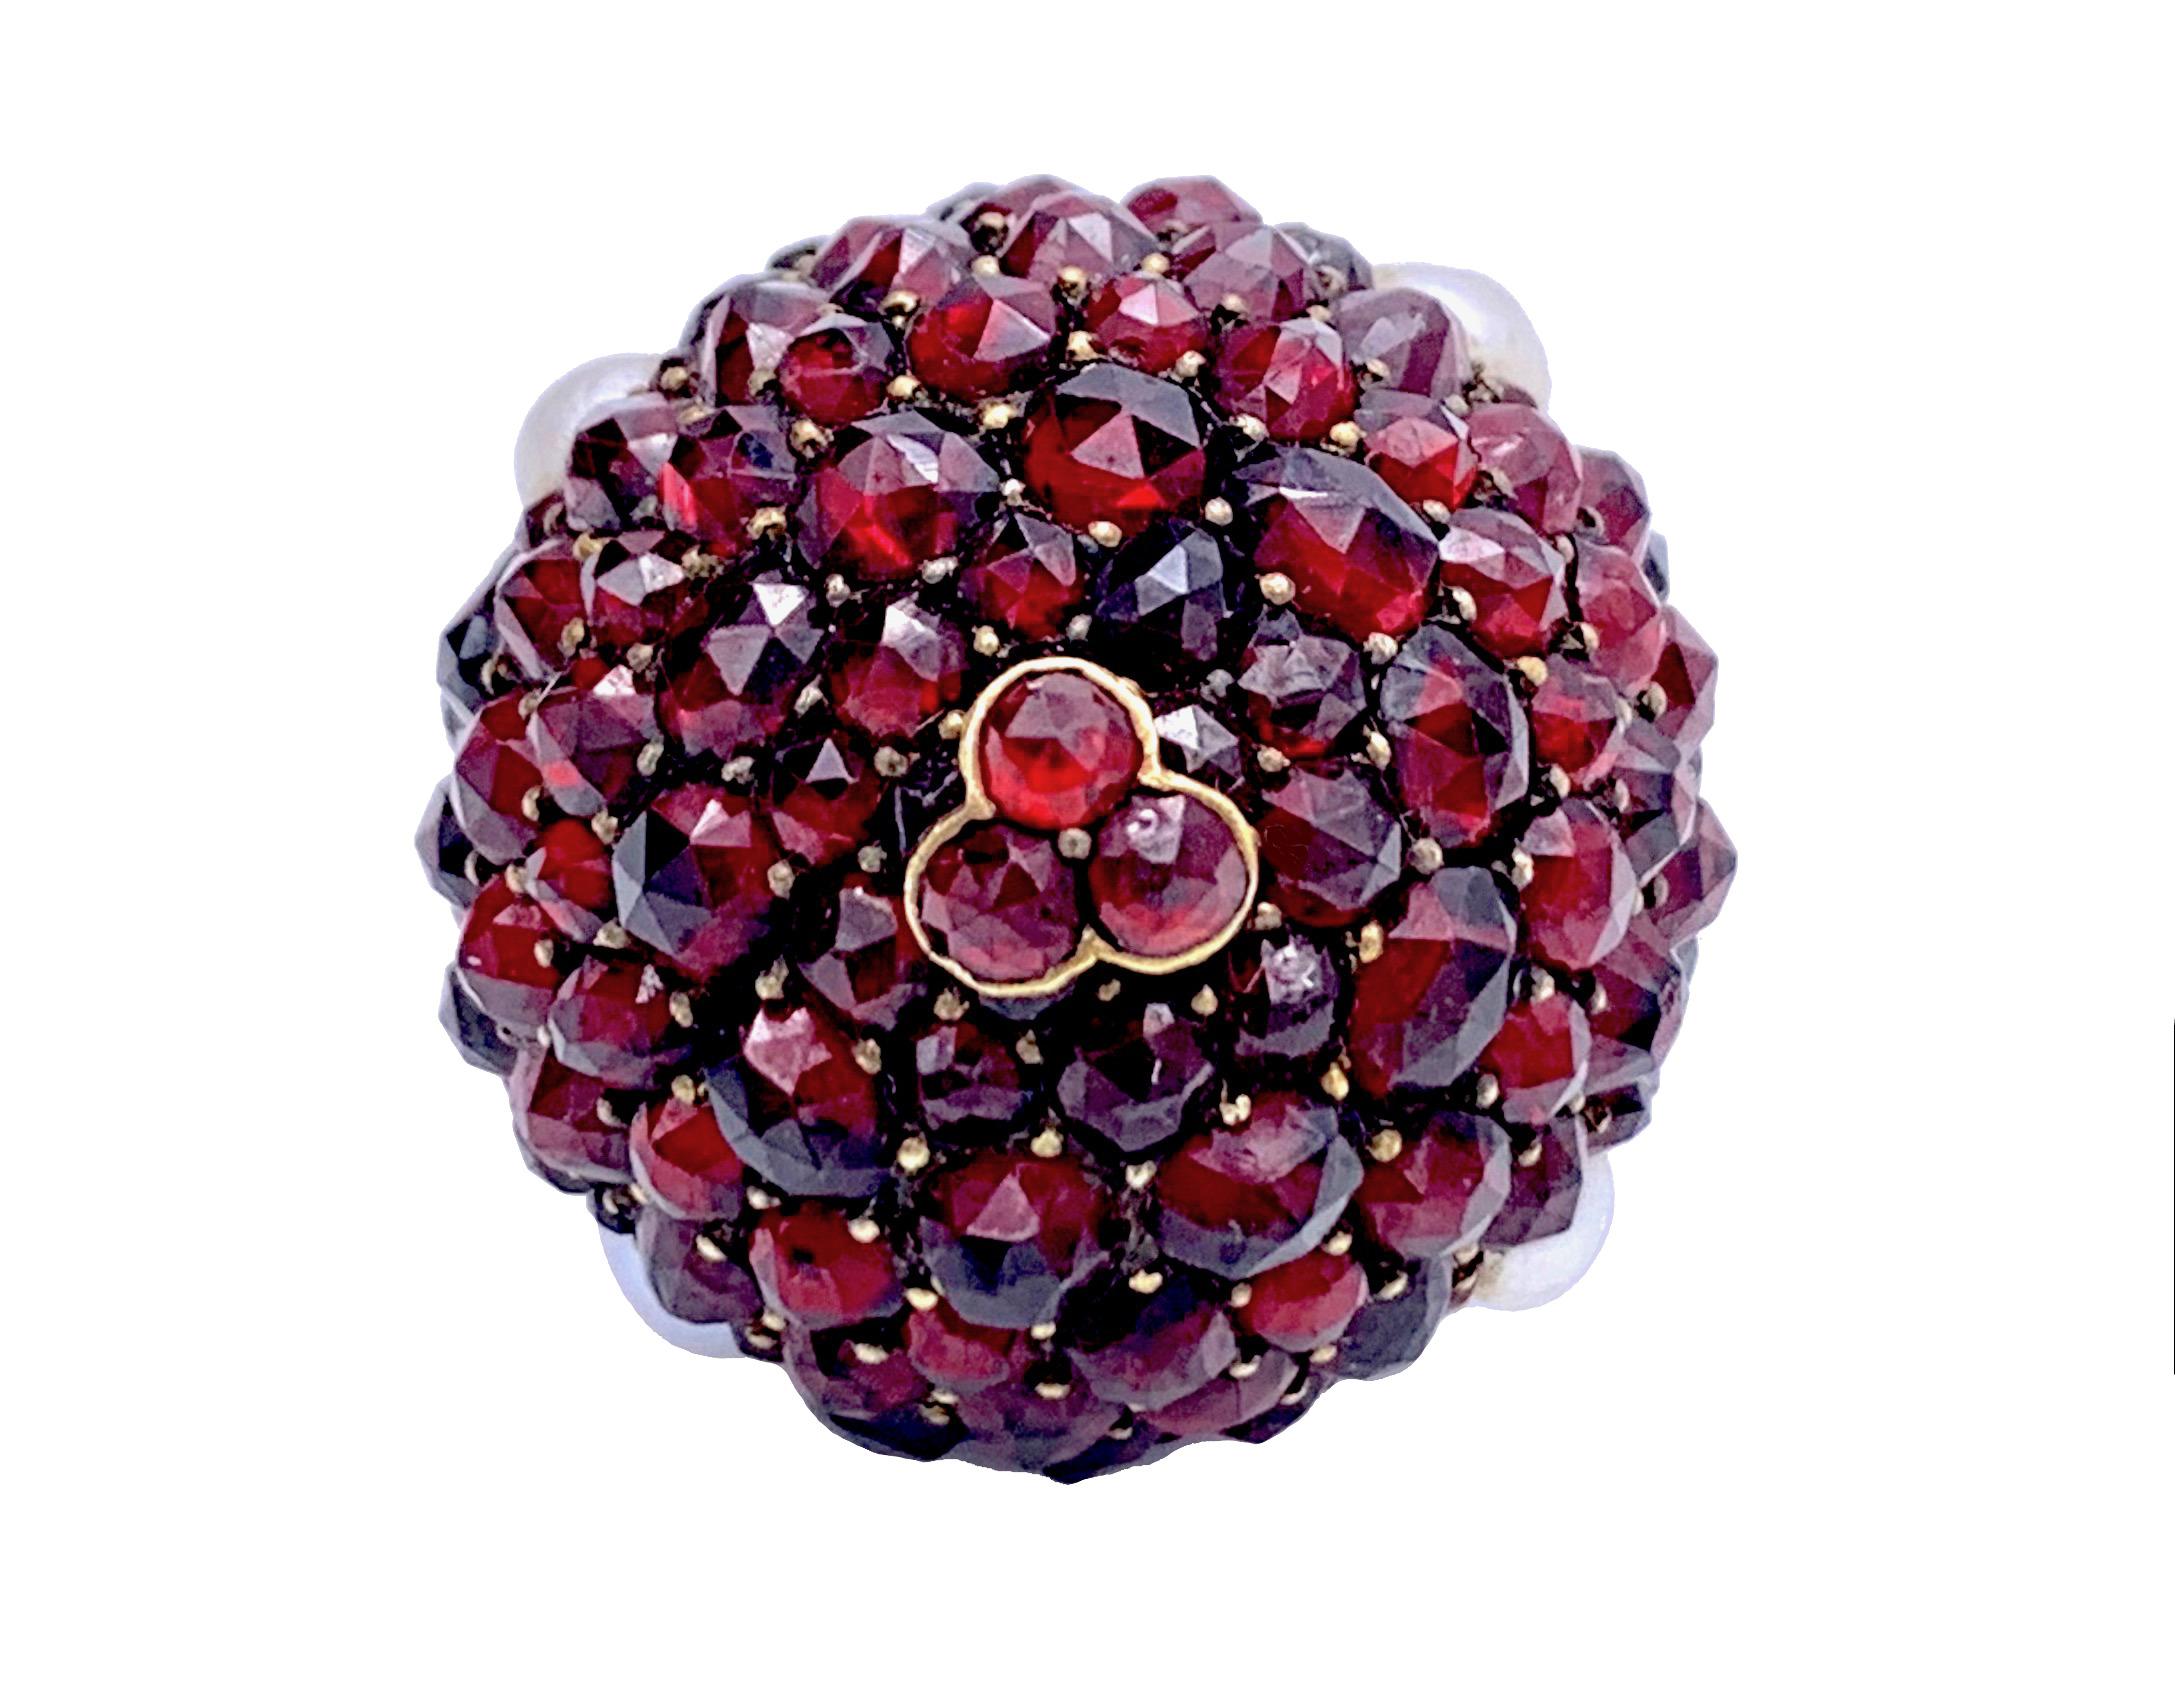  The charming pendant in the shape of a ball is set with facetted garnets and river pearls.